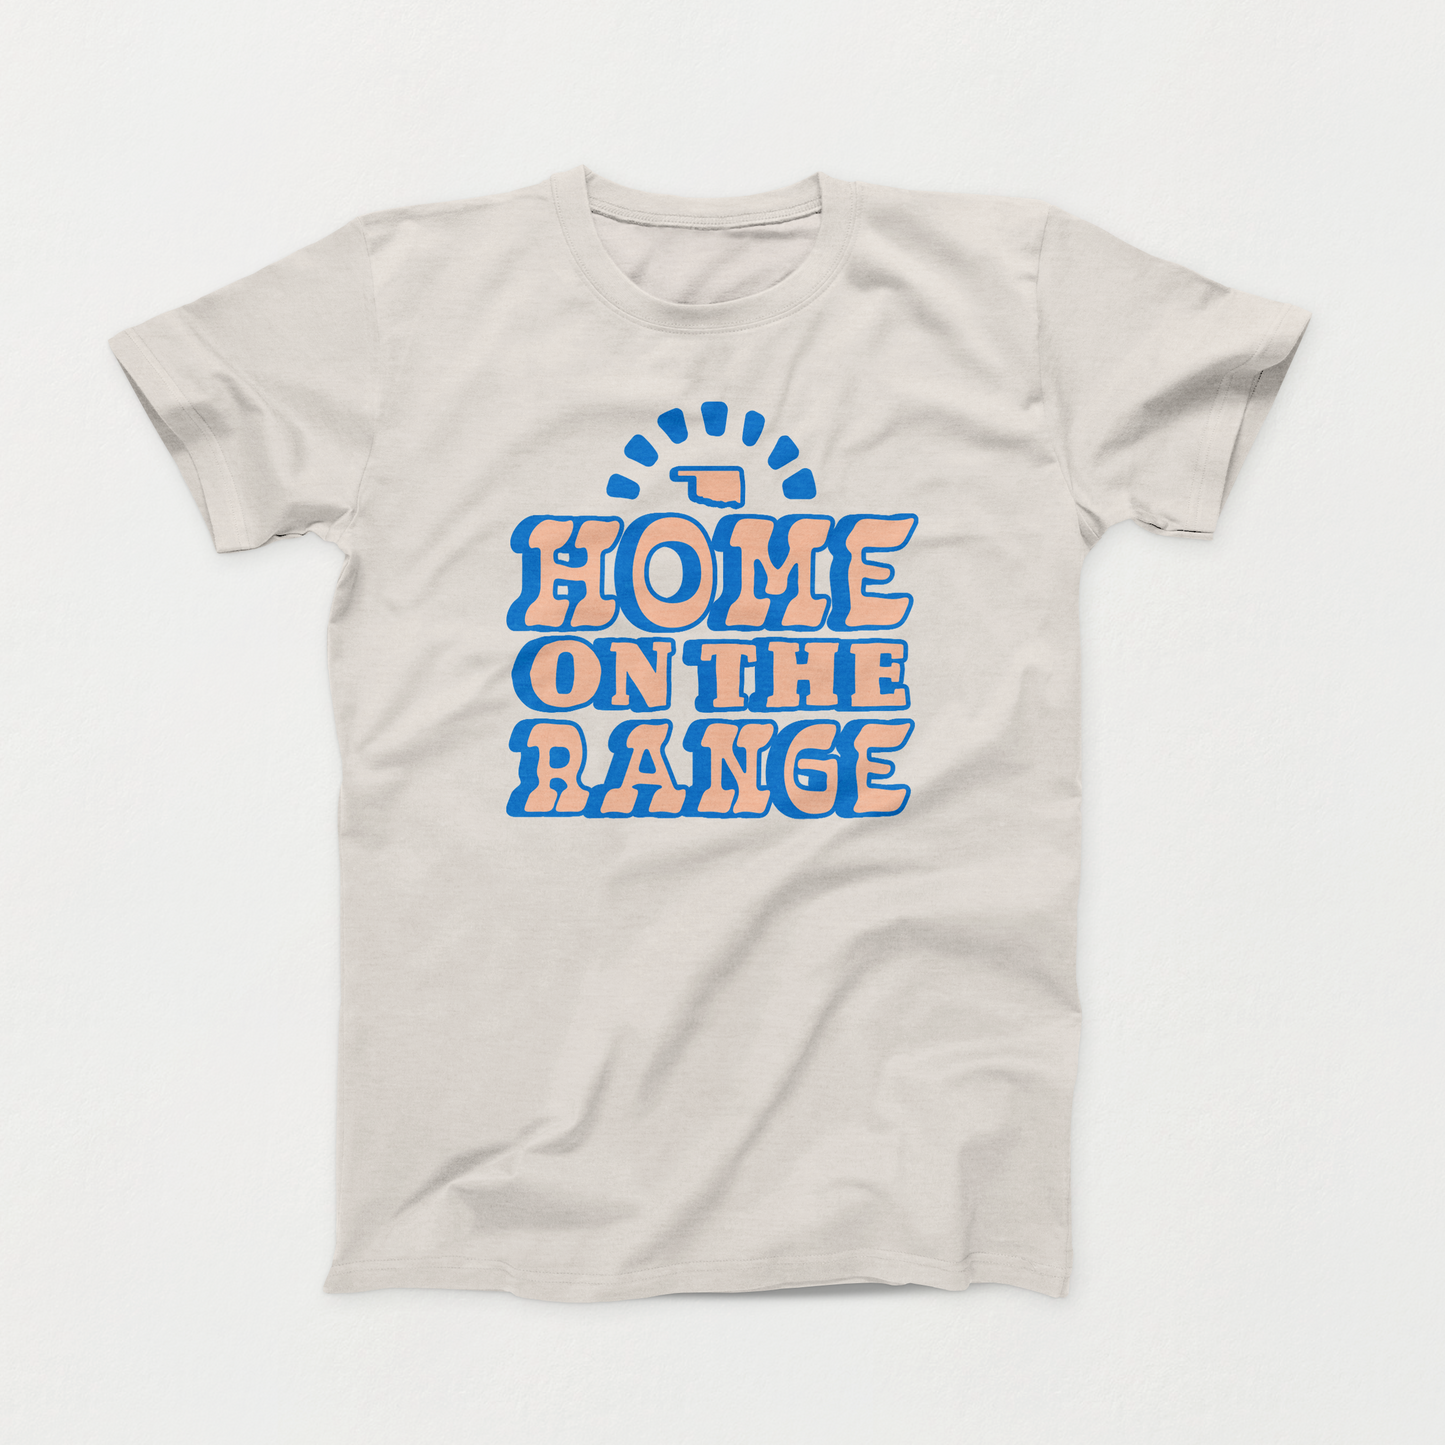 Light Heather Cement colored Oklahoma T-shirt. In stacked font printed in blue and light orange is "HOME," "ON THE," "RANGE." Above the words is a small state symbol.